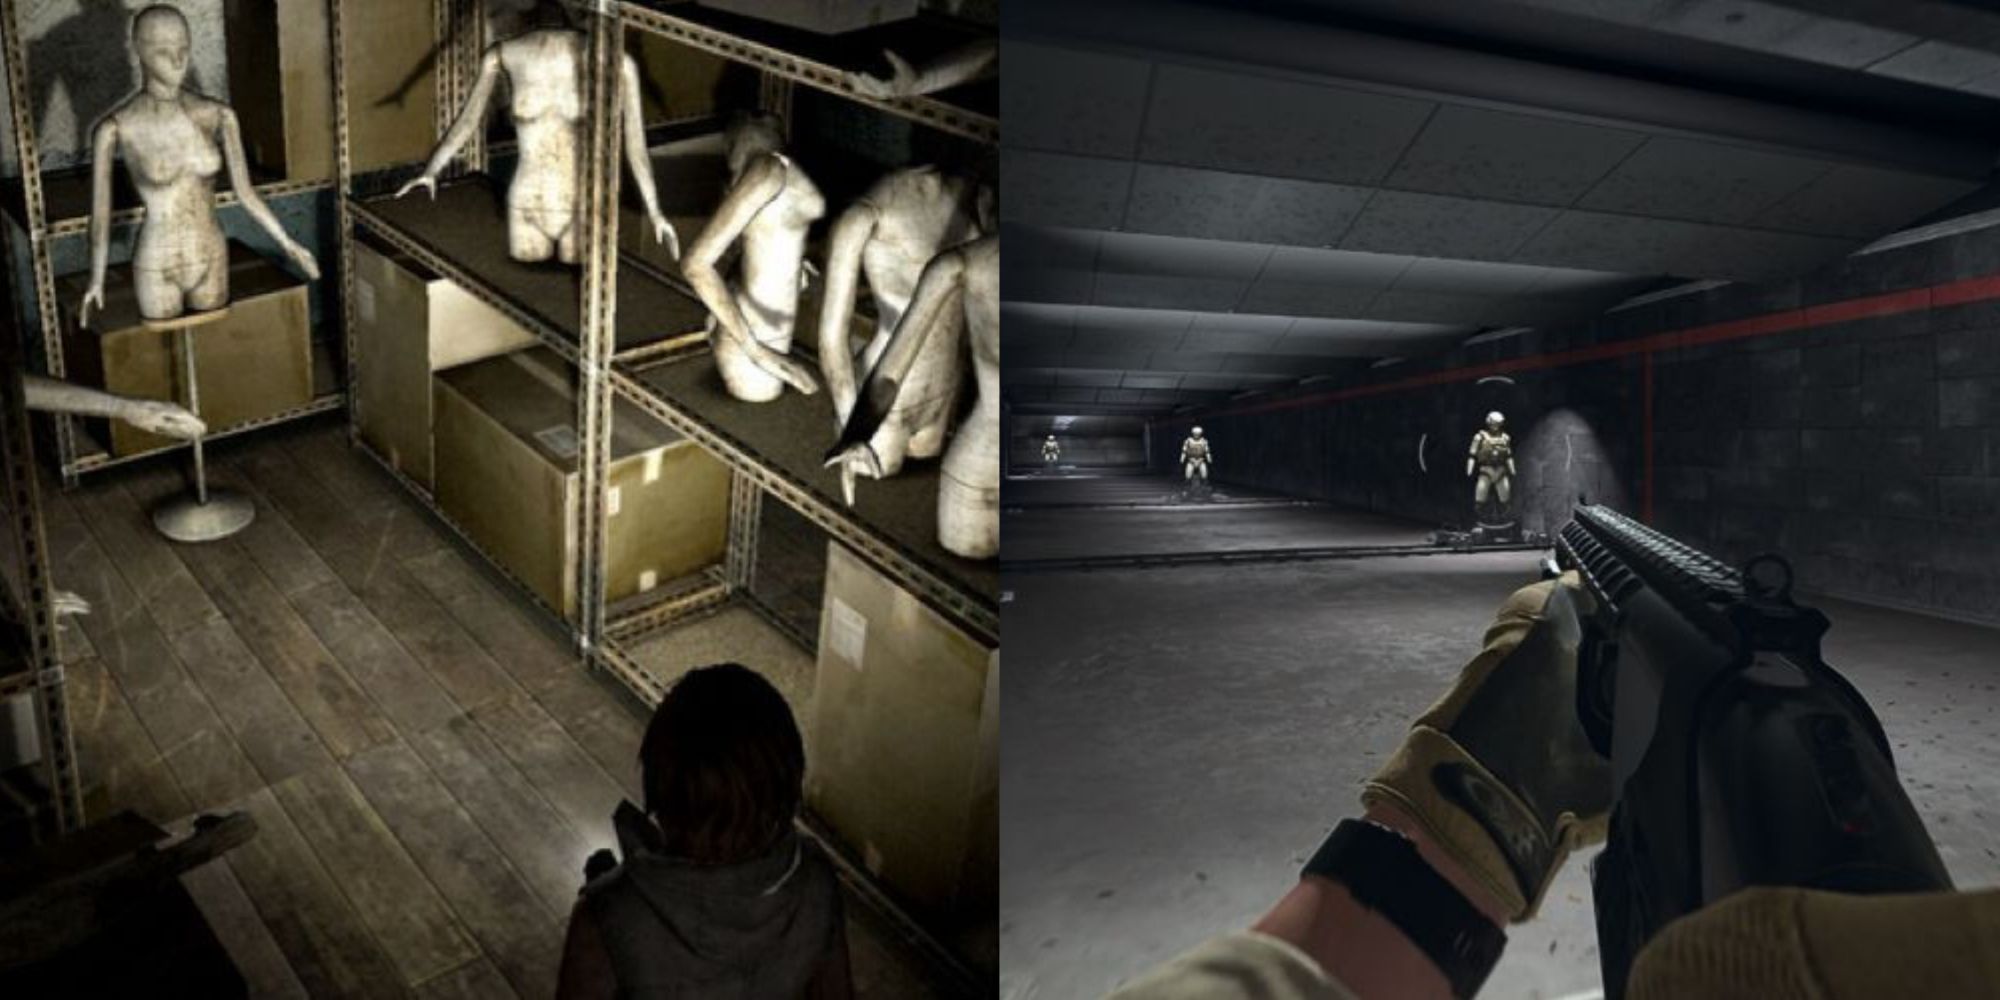 The terrifying Mannequin room from Silent Hill 3 and a Bryson 890 from Call of Duty: Modern Warfare 2.